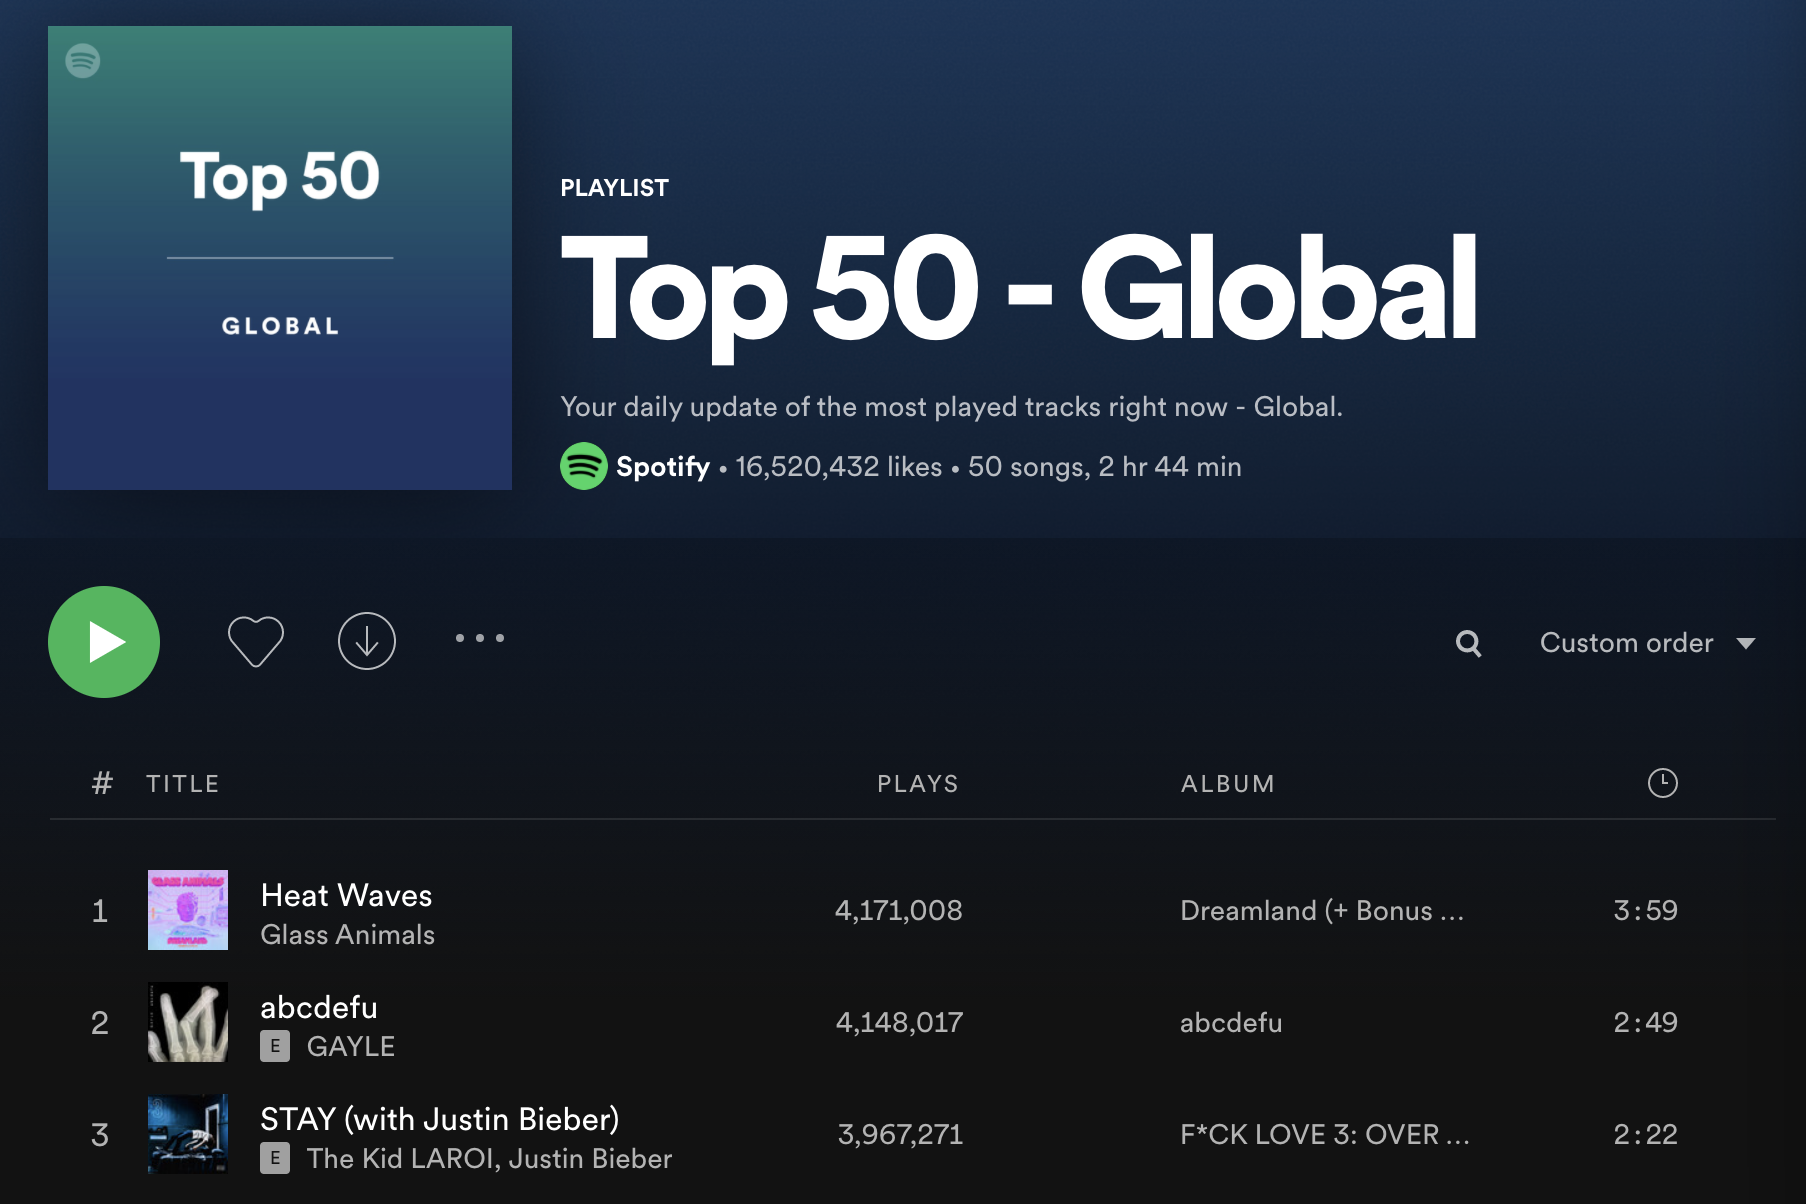 The top 3 songs on Spotify's "Top 50 - Global" chart... all being driven by TikTok trends.